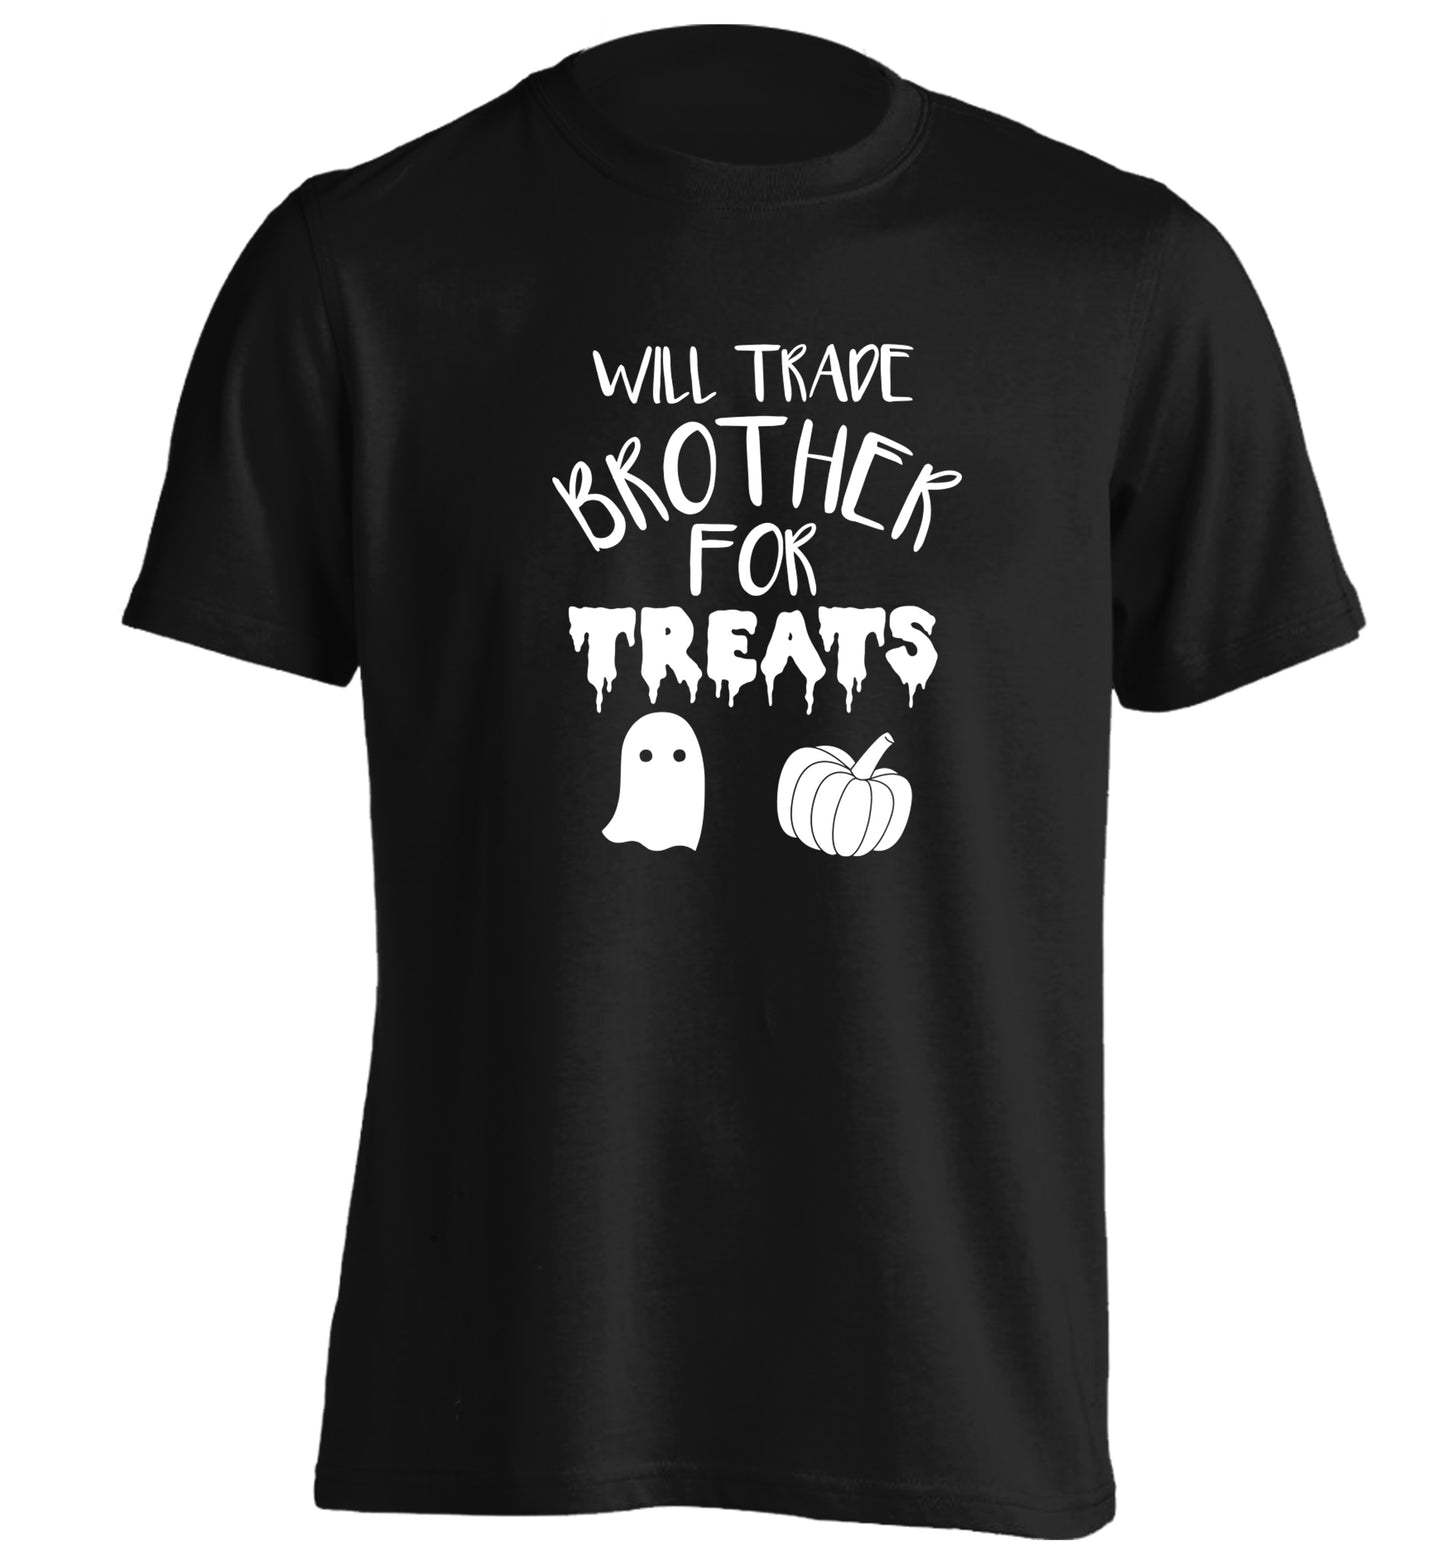 Will trade brother for sweets adults unisex black Tshirt 2XL